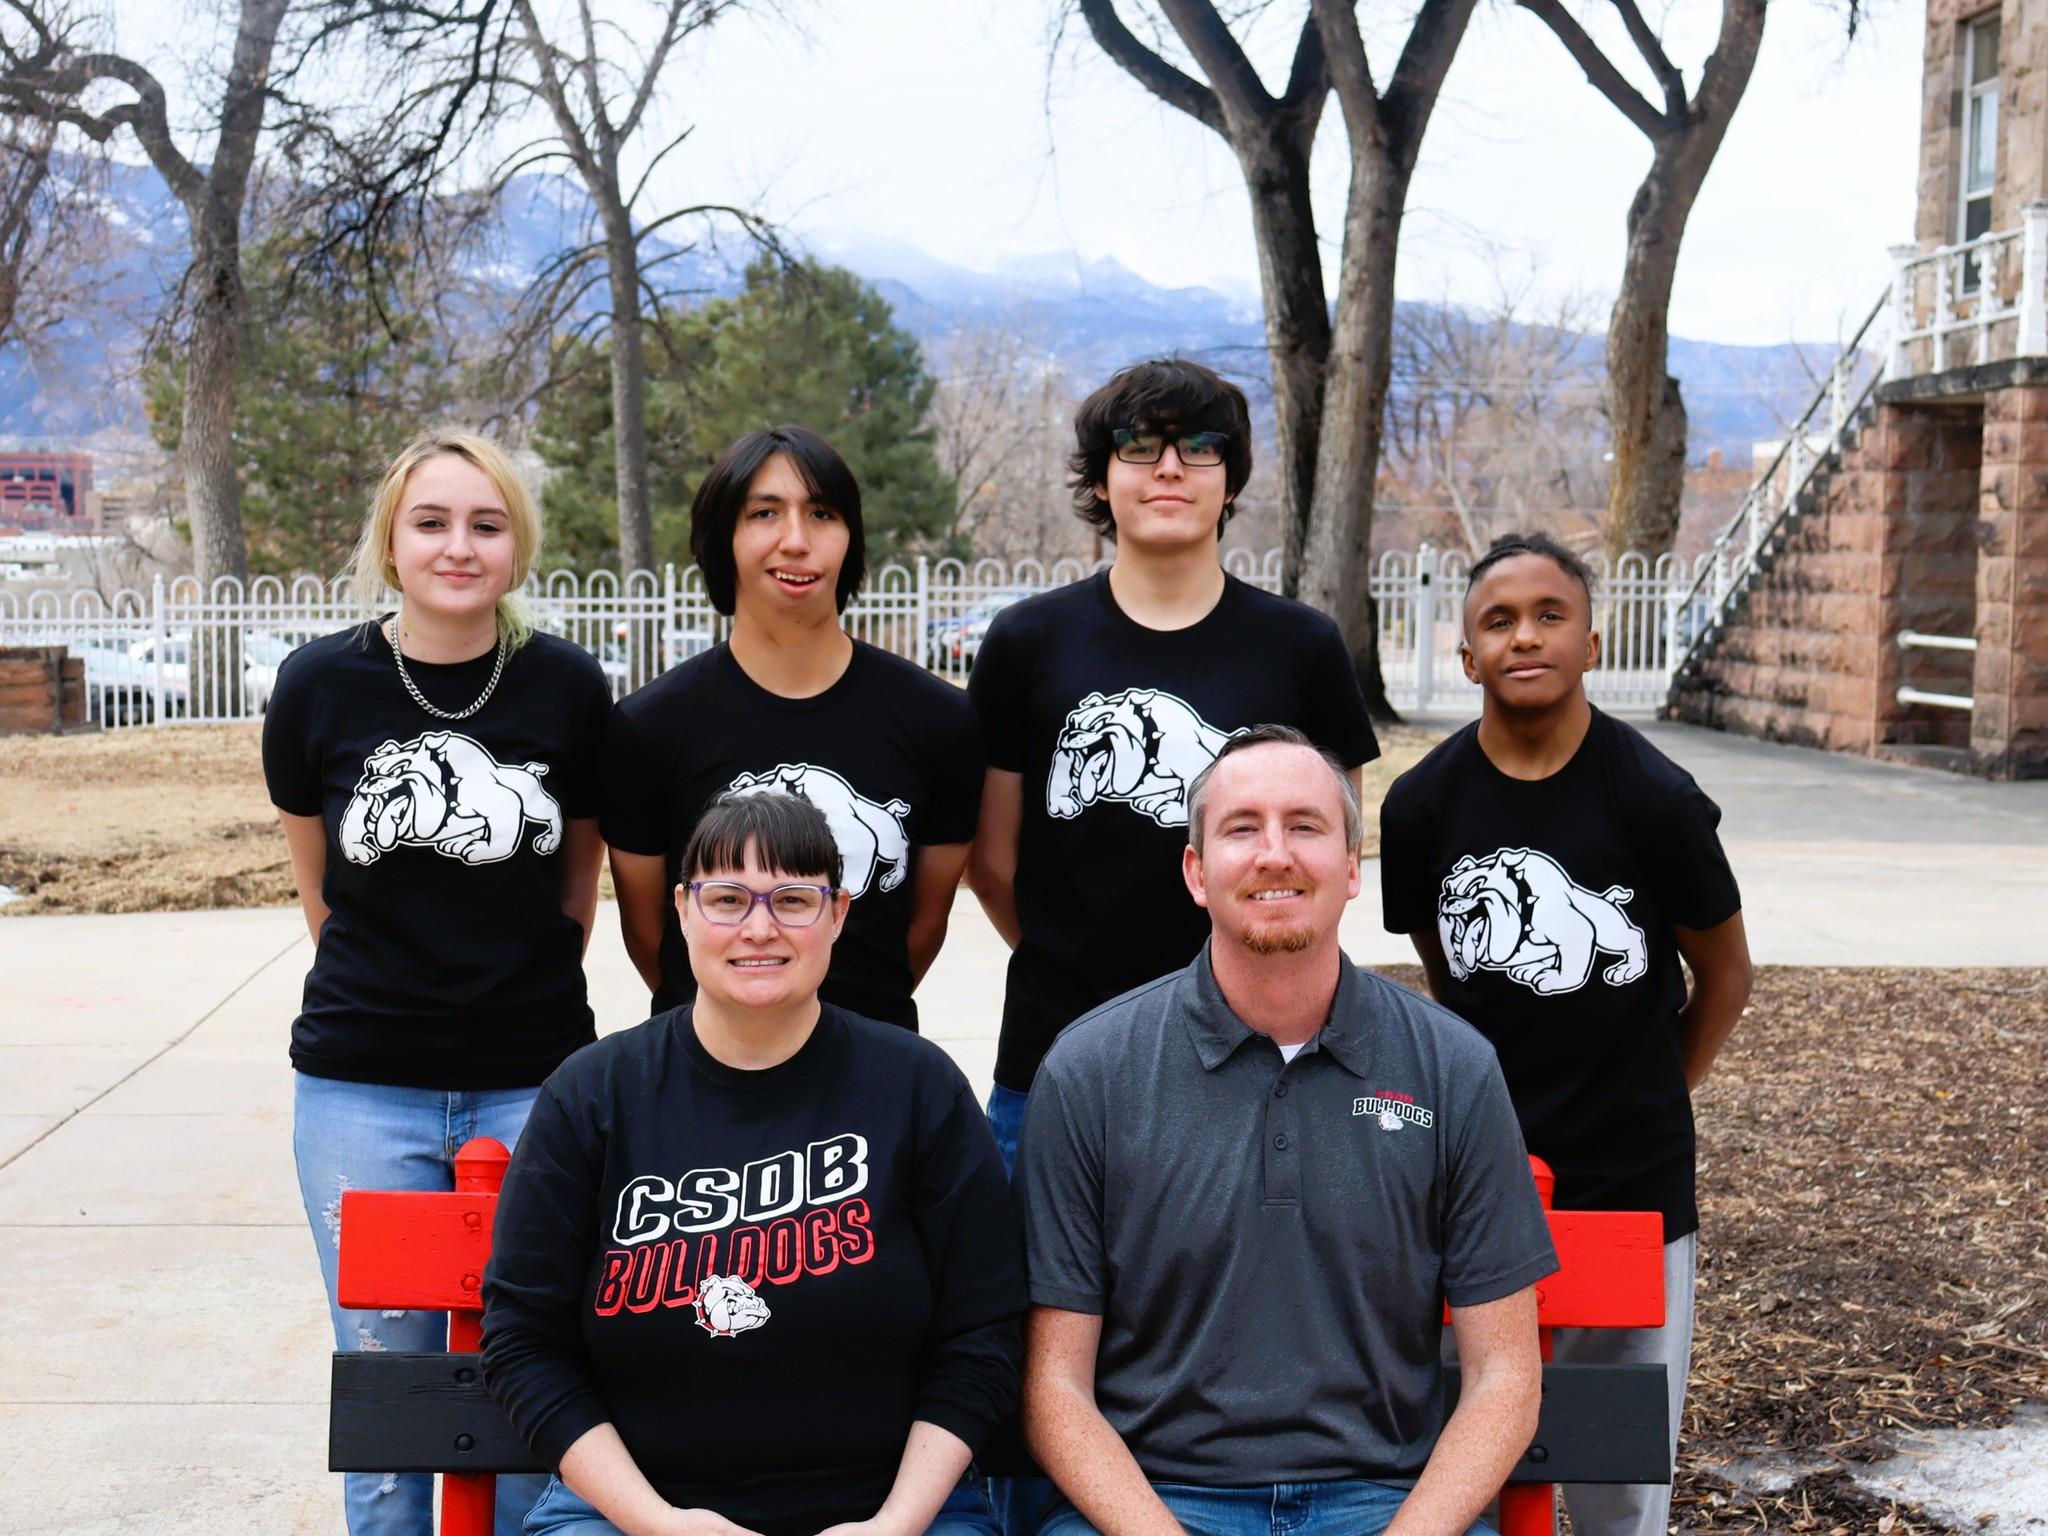  Four students in black bulldog shirts stand in the back, while two coaches sit in front of them, with mountains and trees in the background